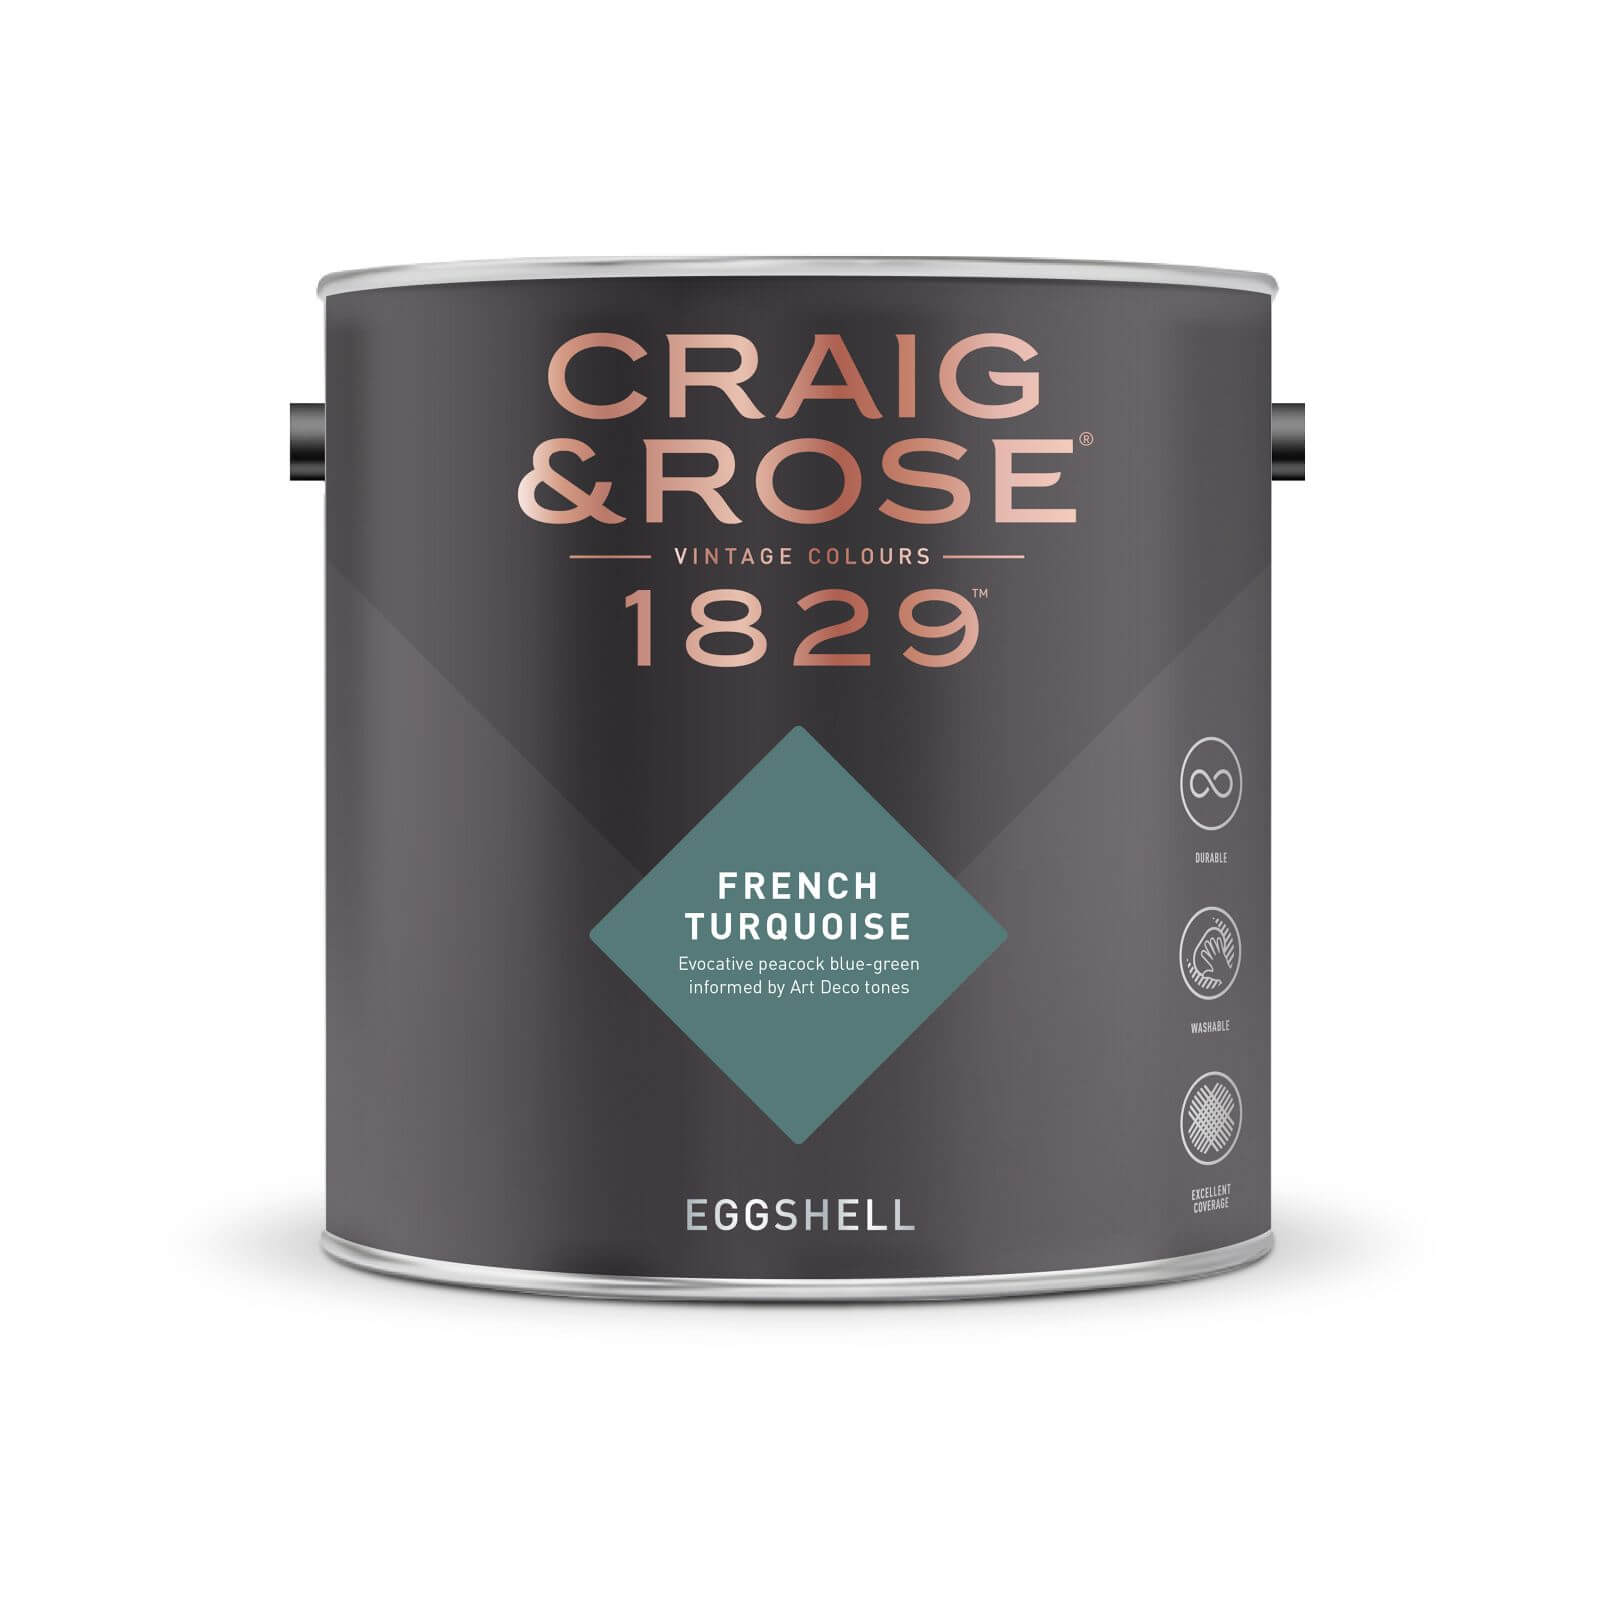 Craig & Rose 1829 Eggshell Paint French Turquoise - 2.5L